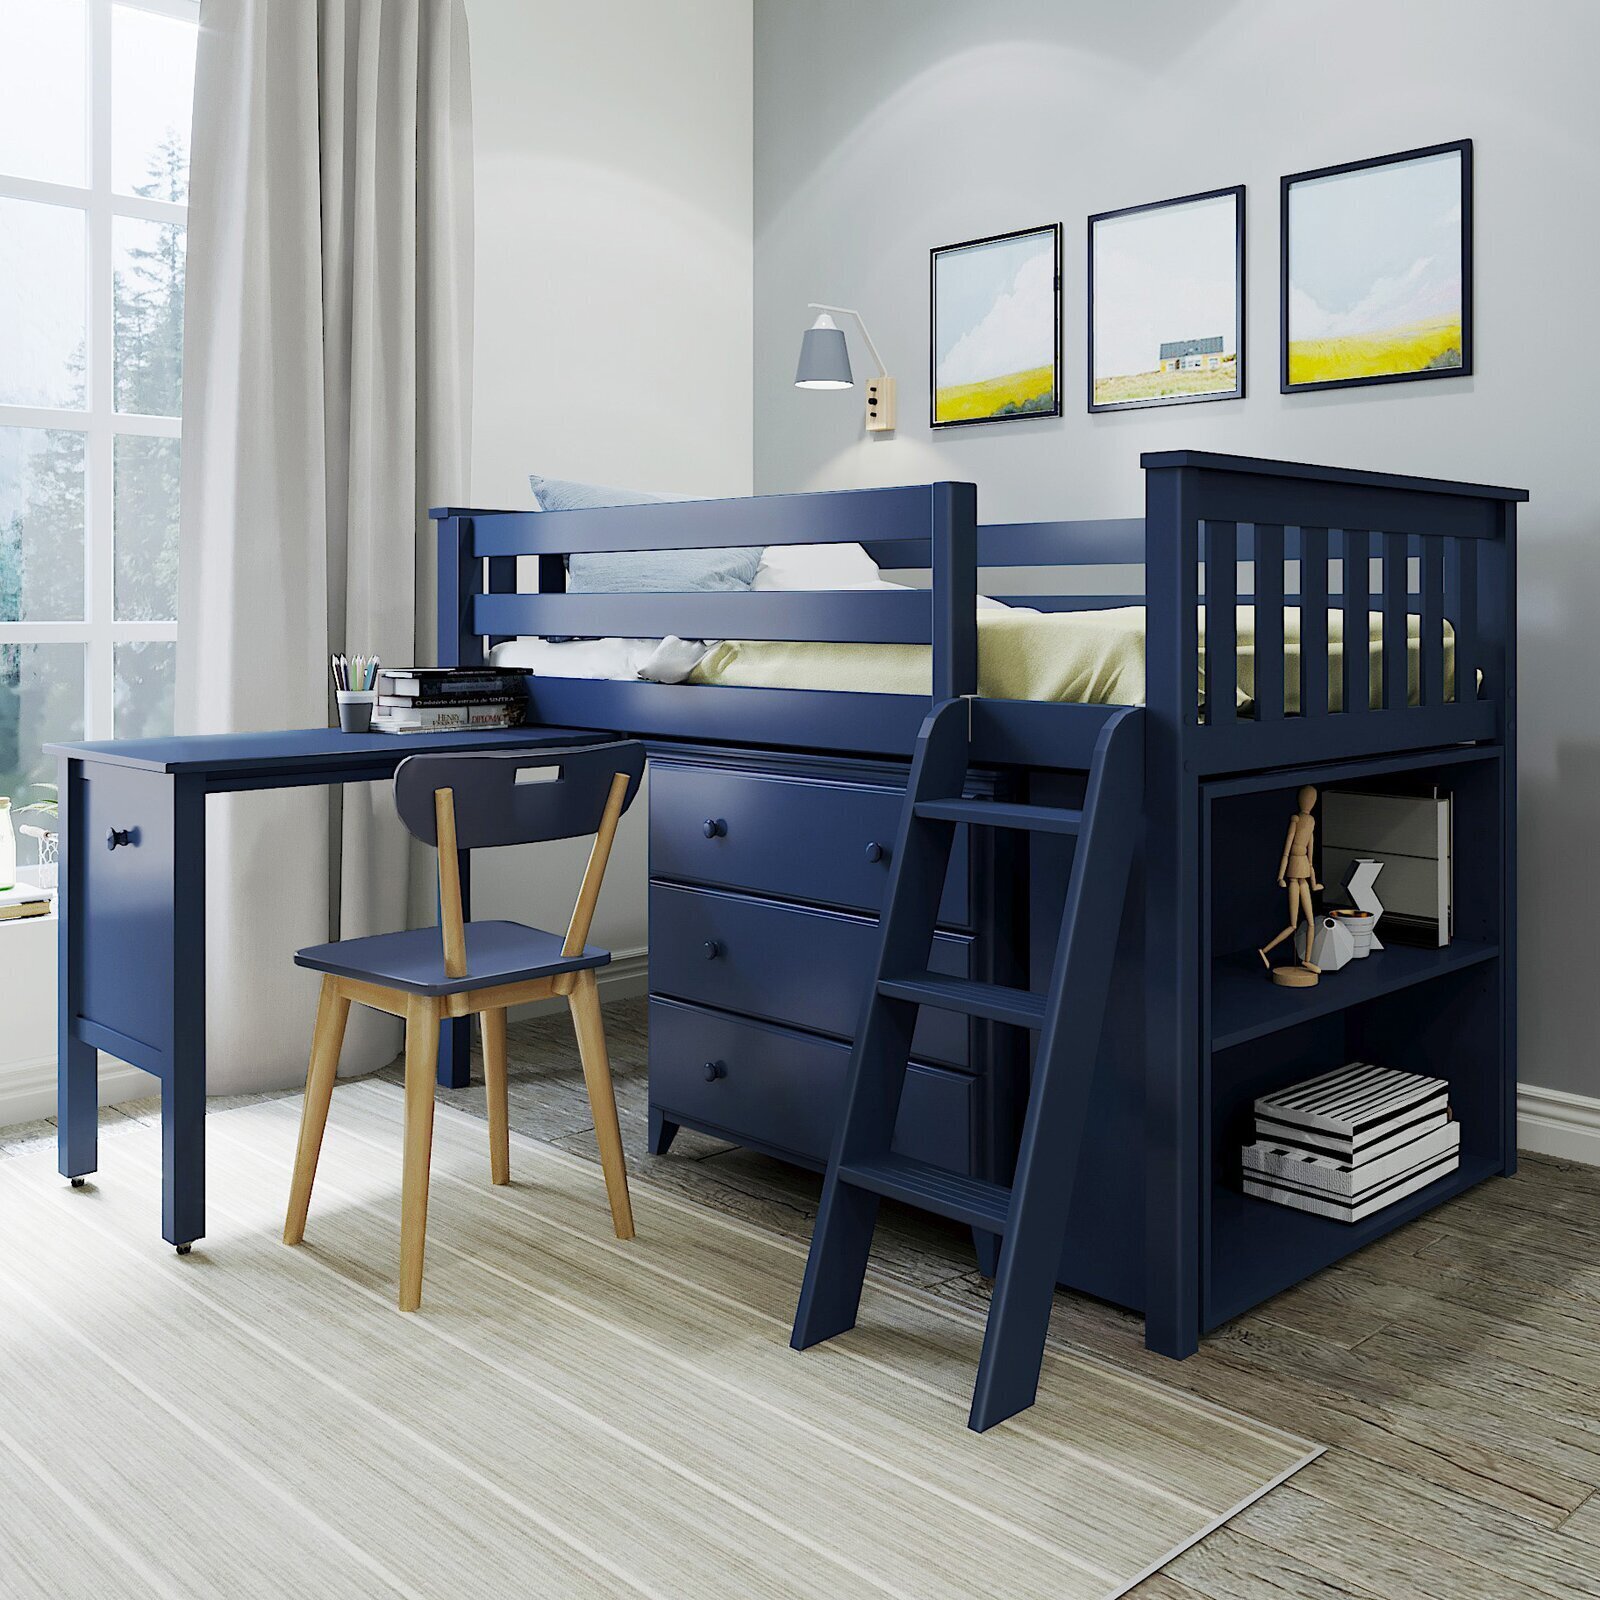 3 Drawer Twin Loft Bed With Desk and Storage